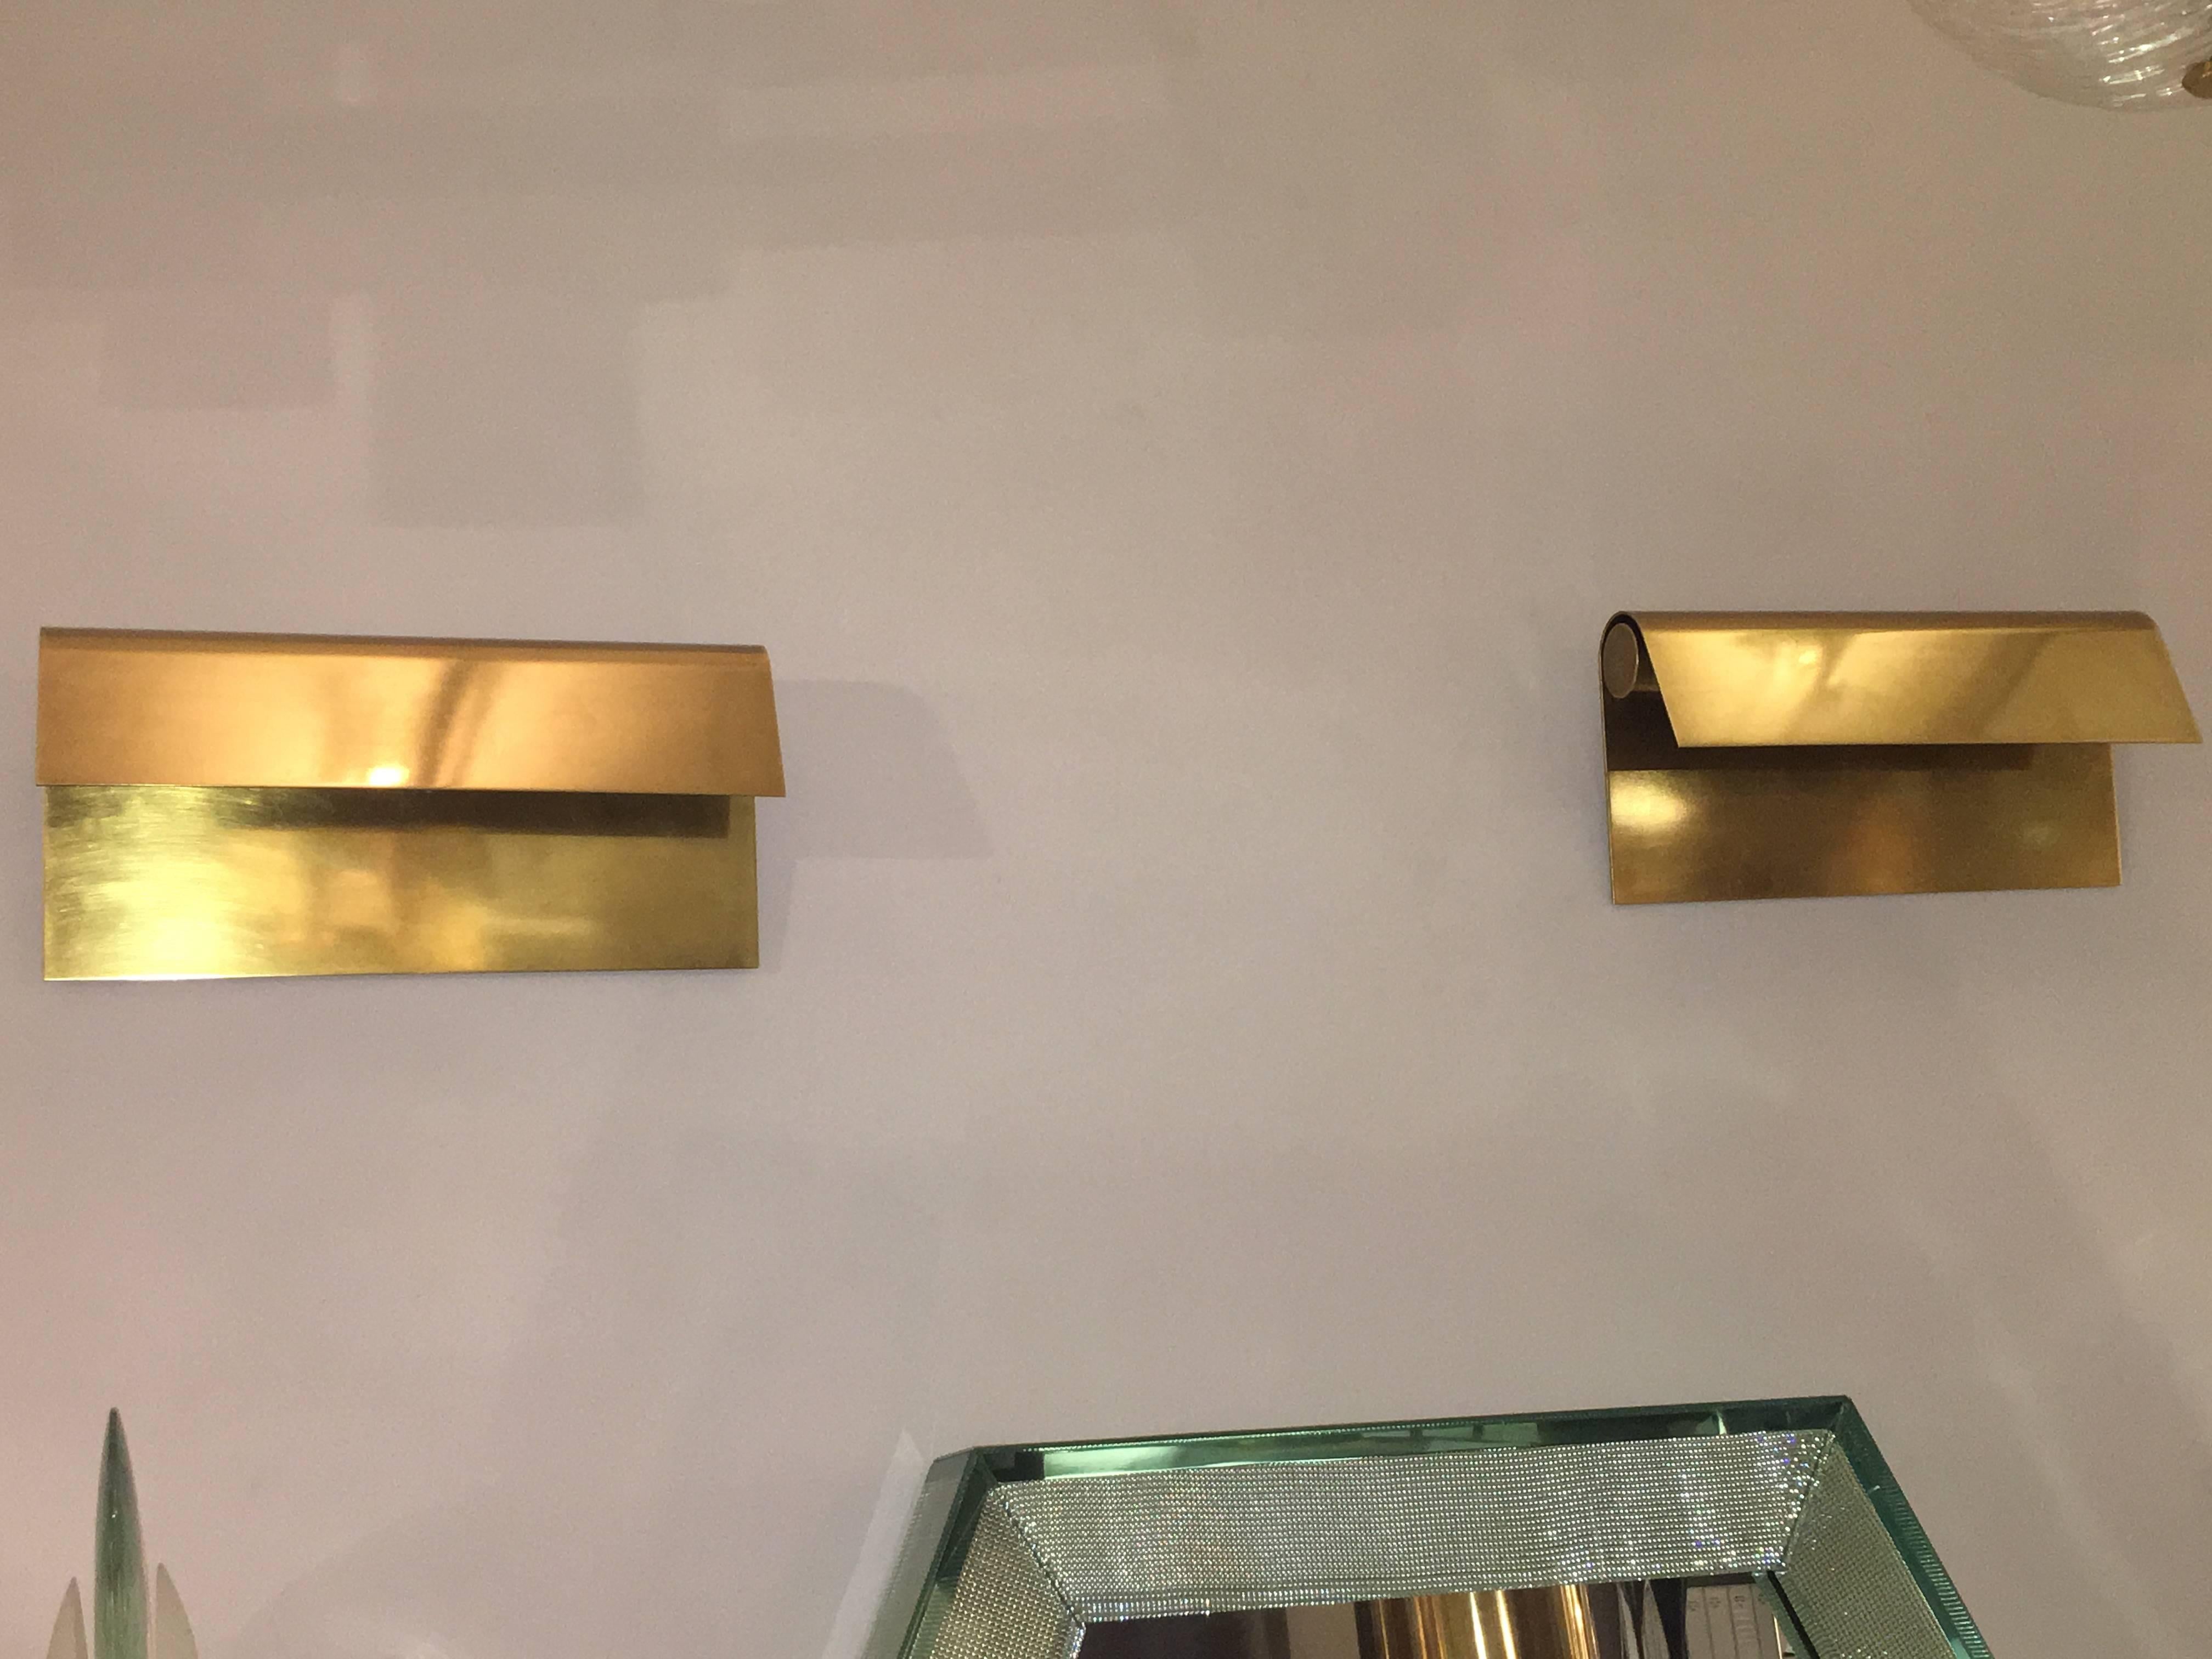 Belgian Pair of Polished Brass Sconces by Christophe Gevers, Belgium, circa 1975